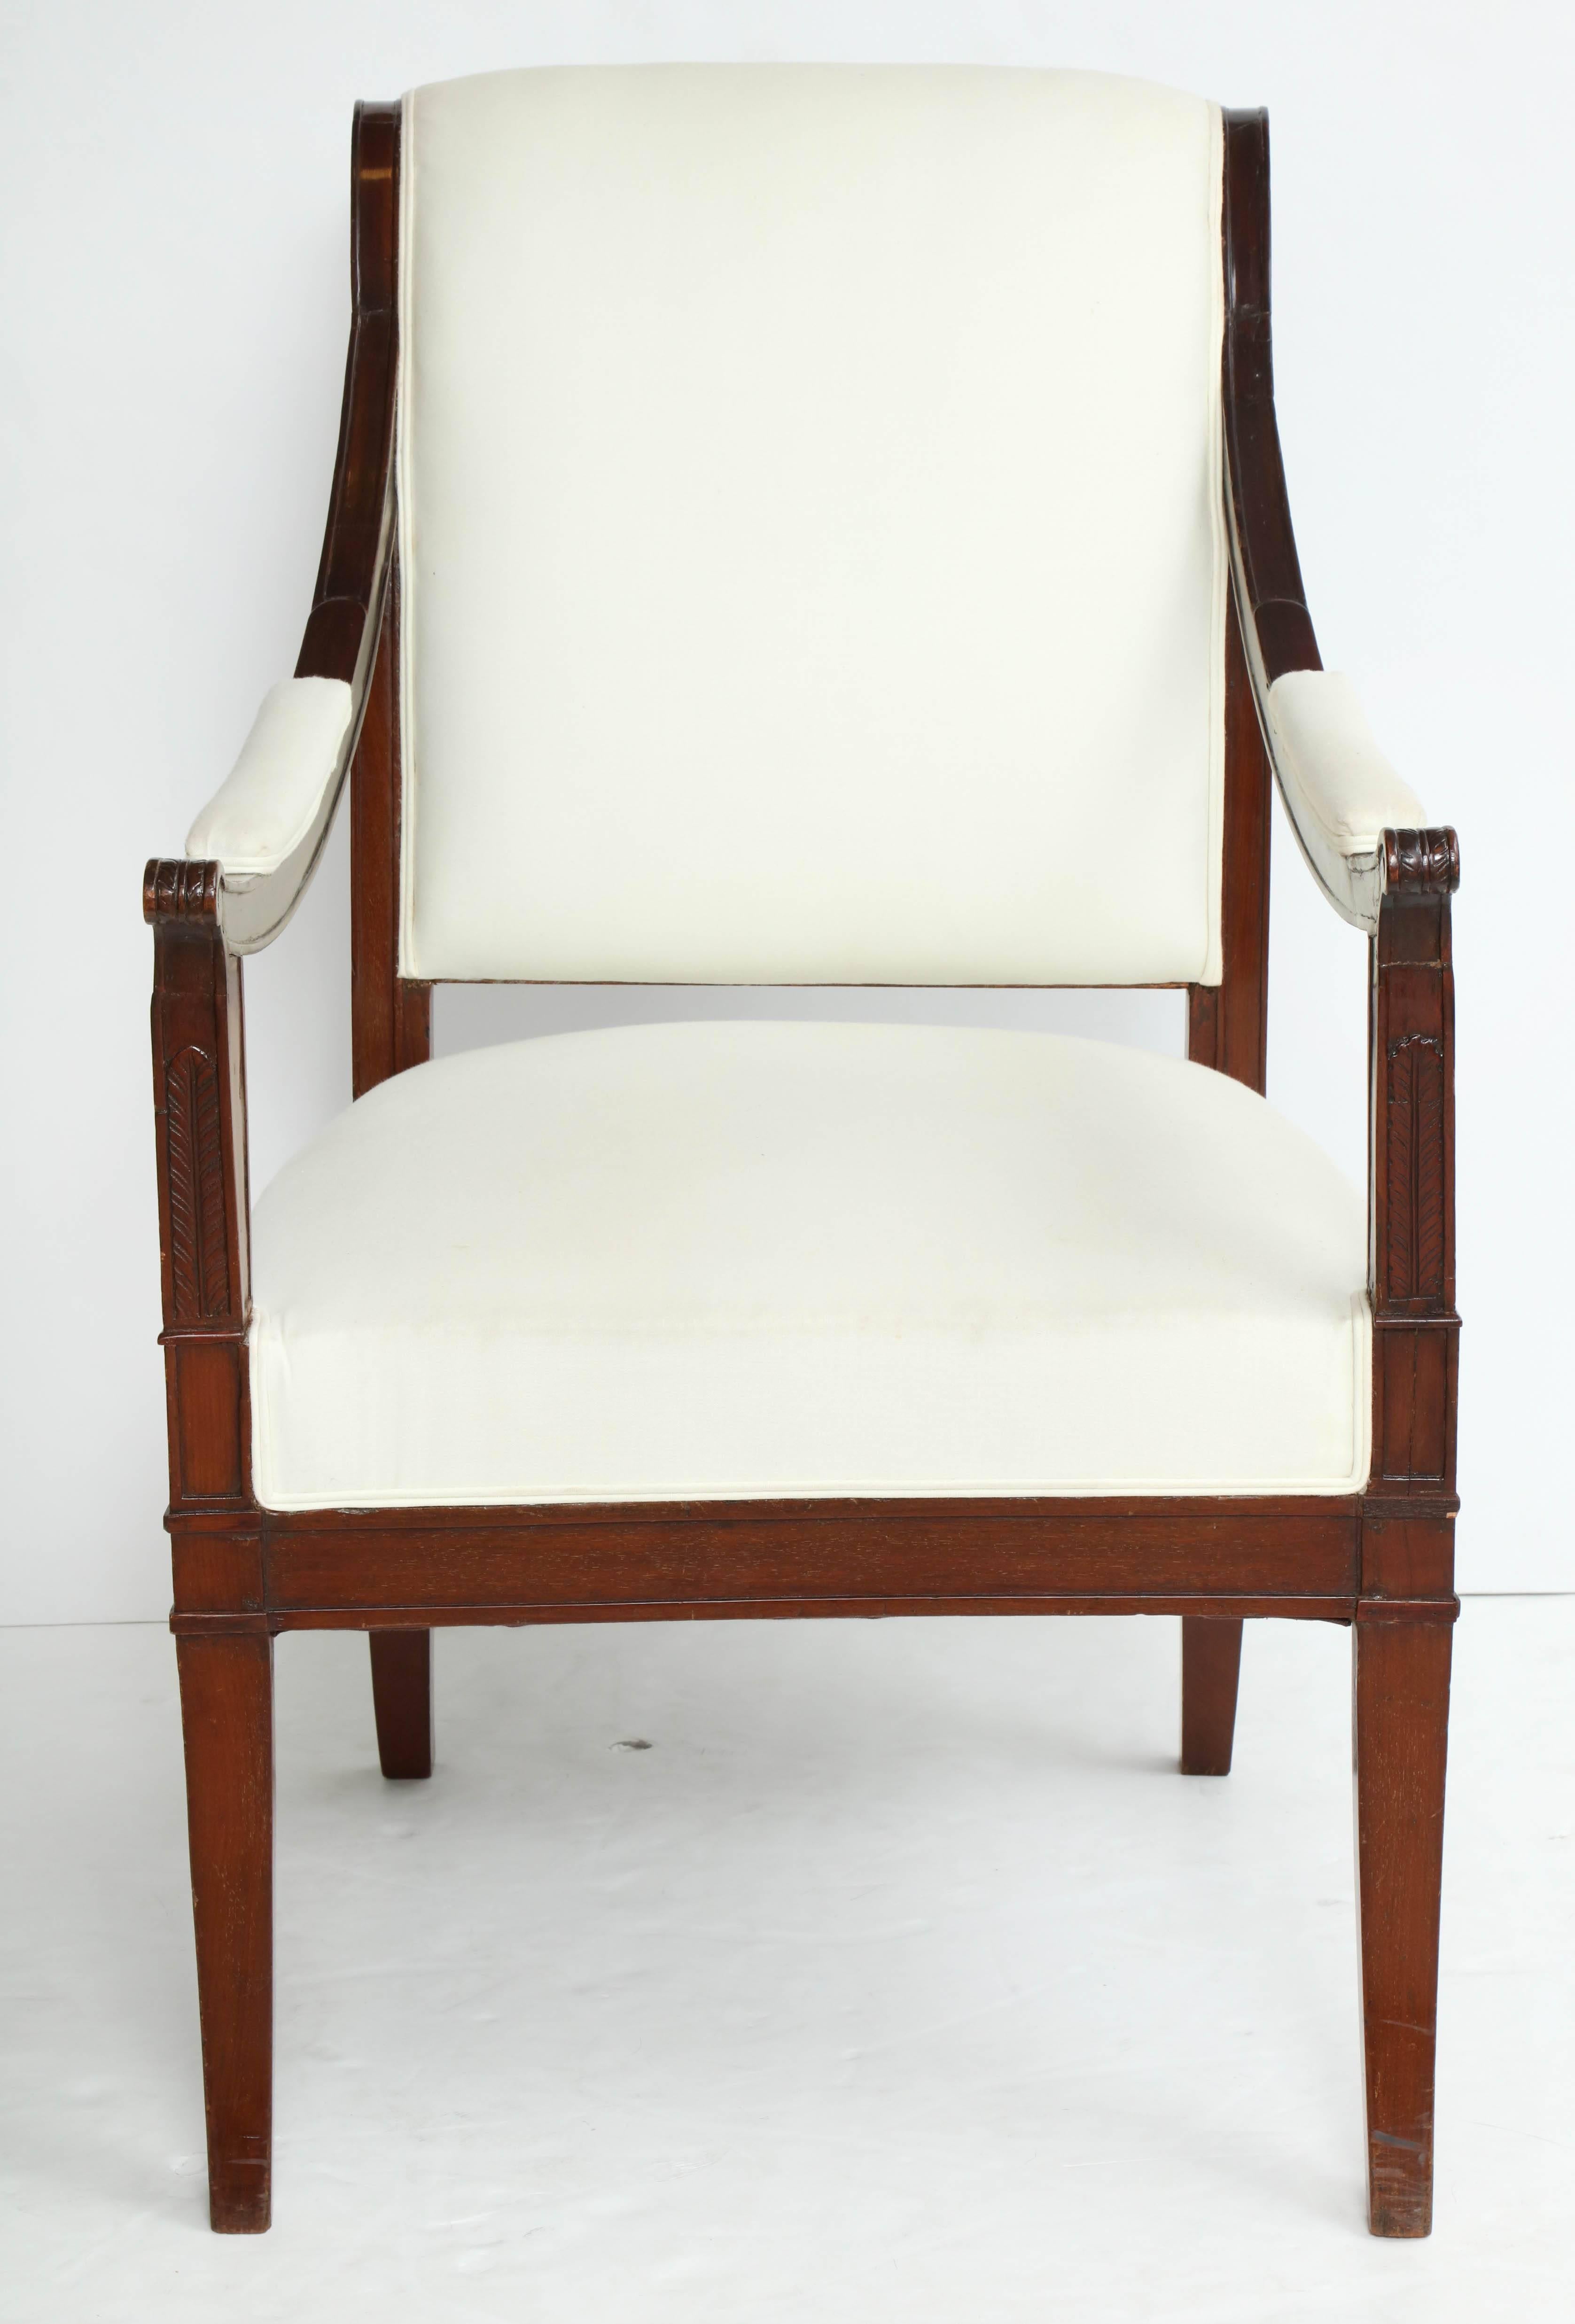 Directoire mahogany fauteuil. Tablet cresting, downswept arms, square outsplayed legs